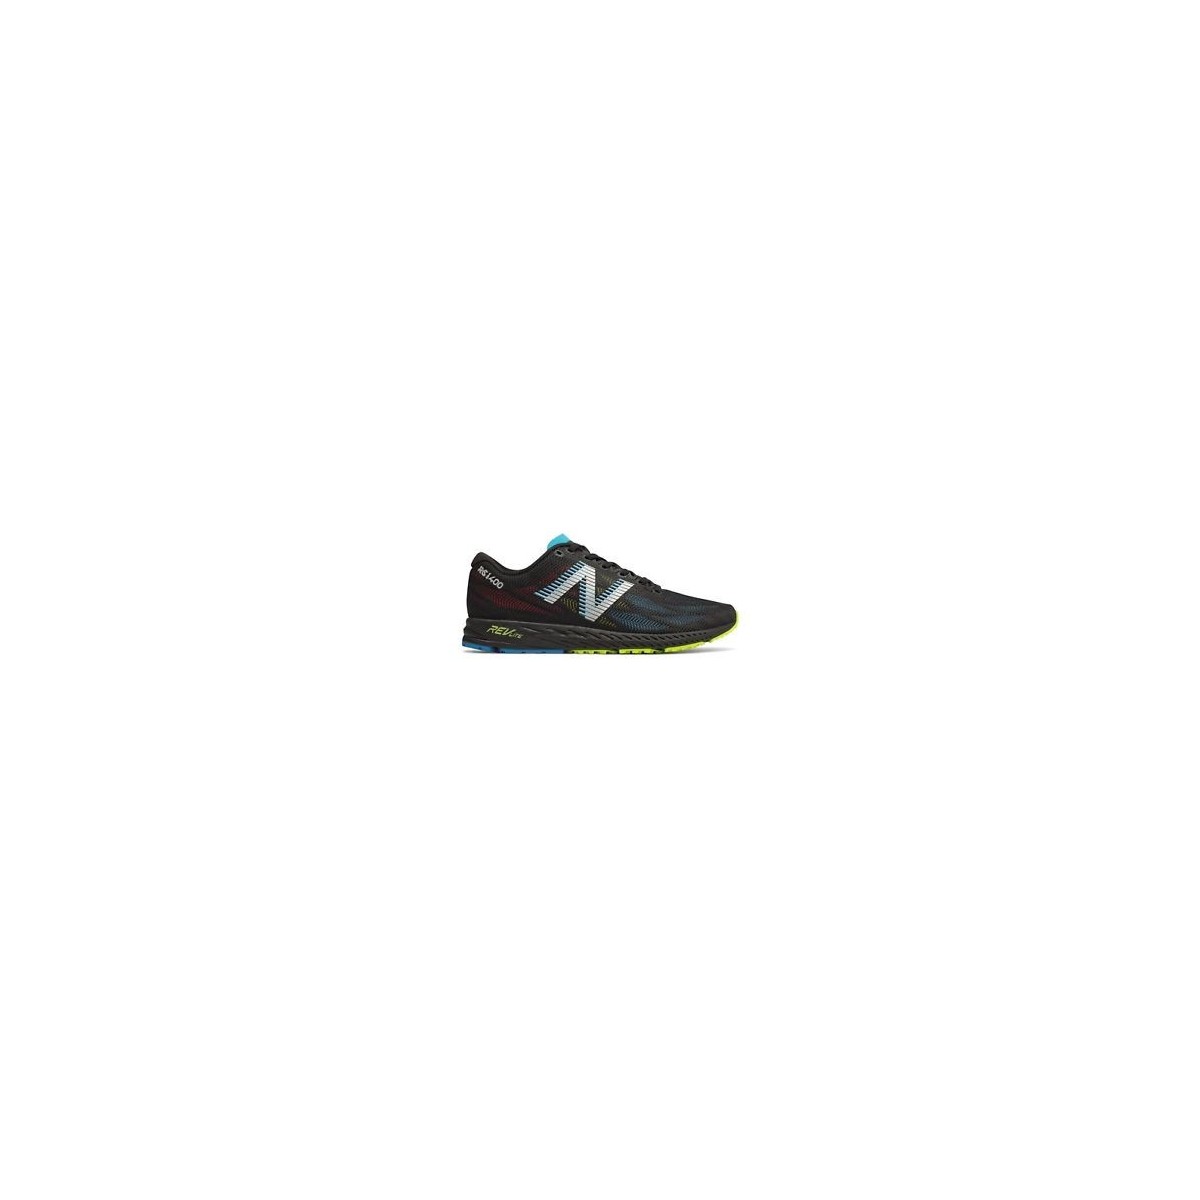 Shop New Balance 1400 Sneakers by A&EimportShop | BUYMA